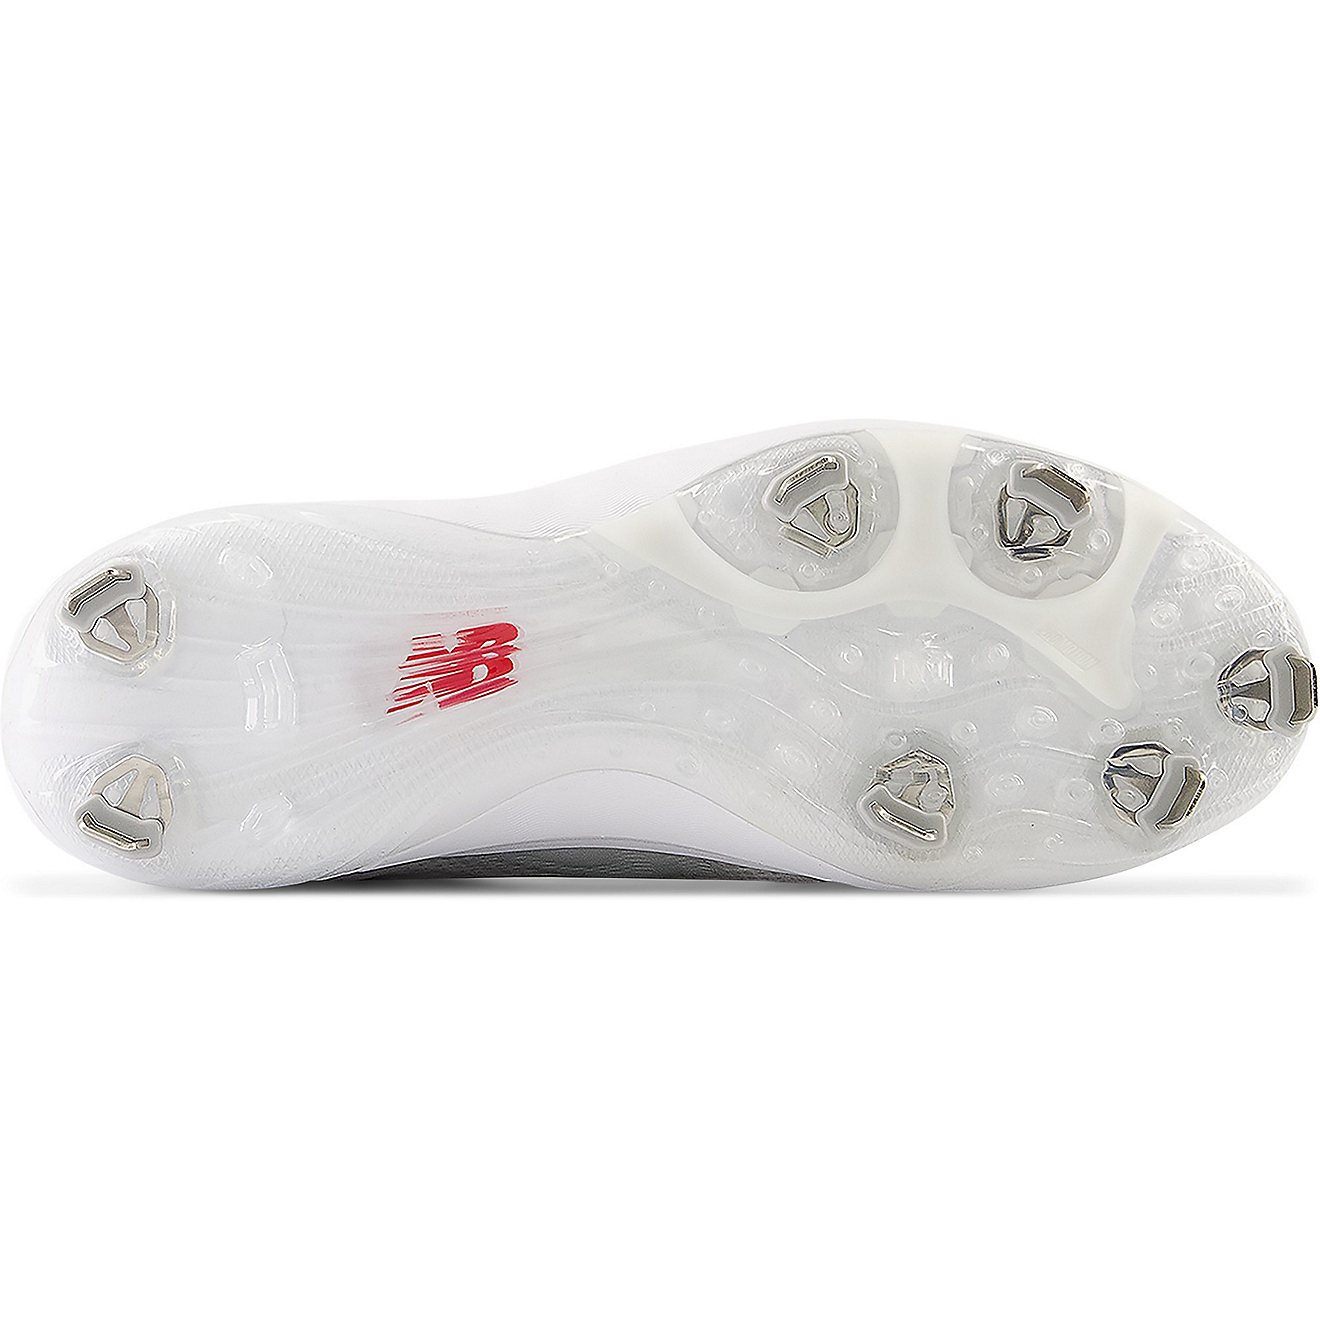 New Balance Men's FuelCell 4040 V7 Metal Baseball Cleats                                                                         - view number 5